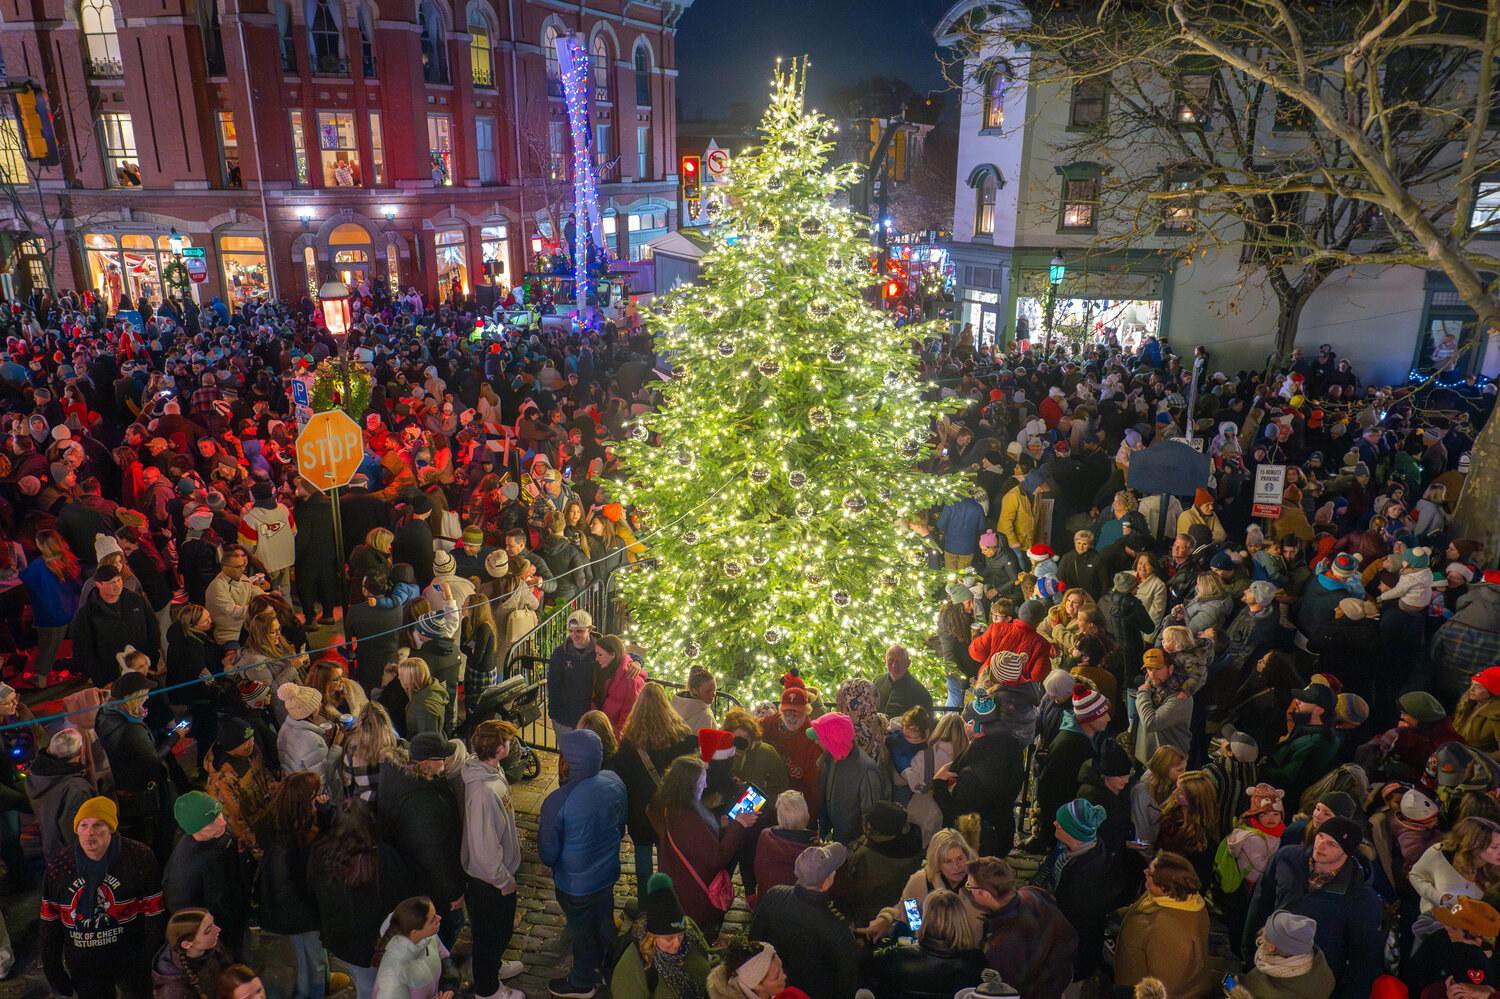 Thousands came out Friday night to take part in Doylestown Winterfest and witness the lighting of the borough’s holiday tree.